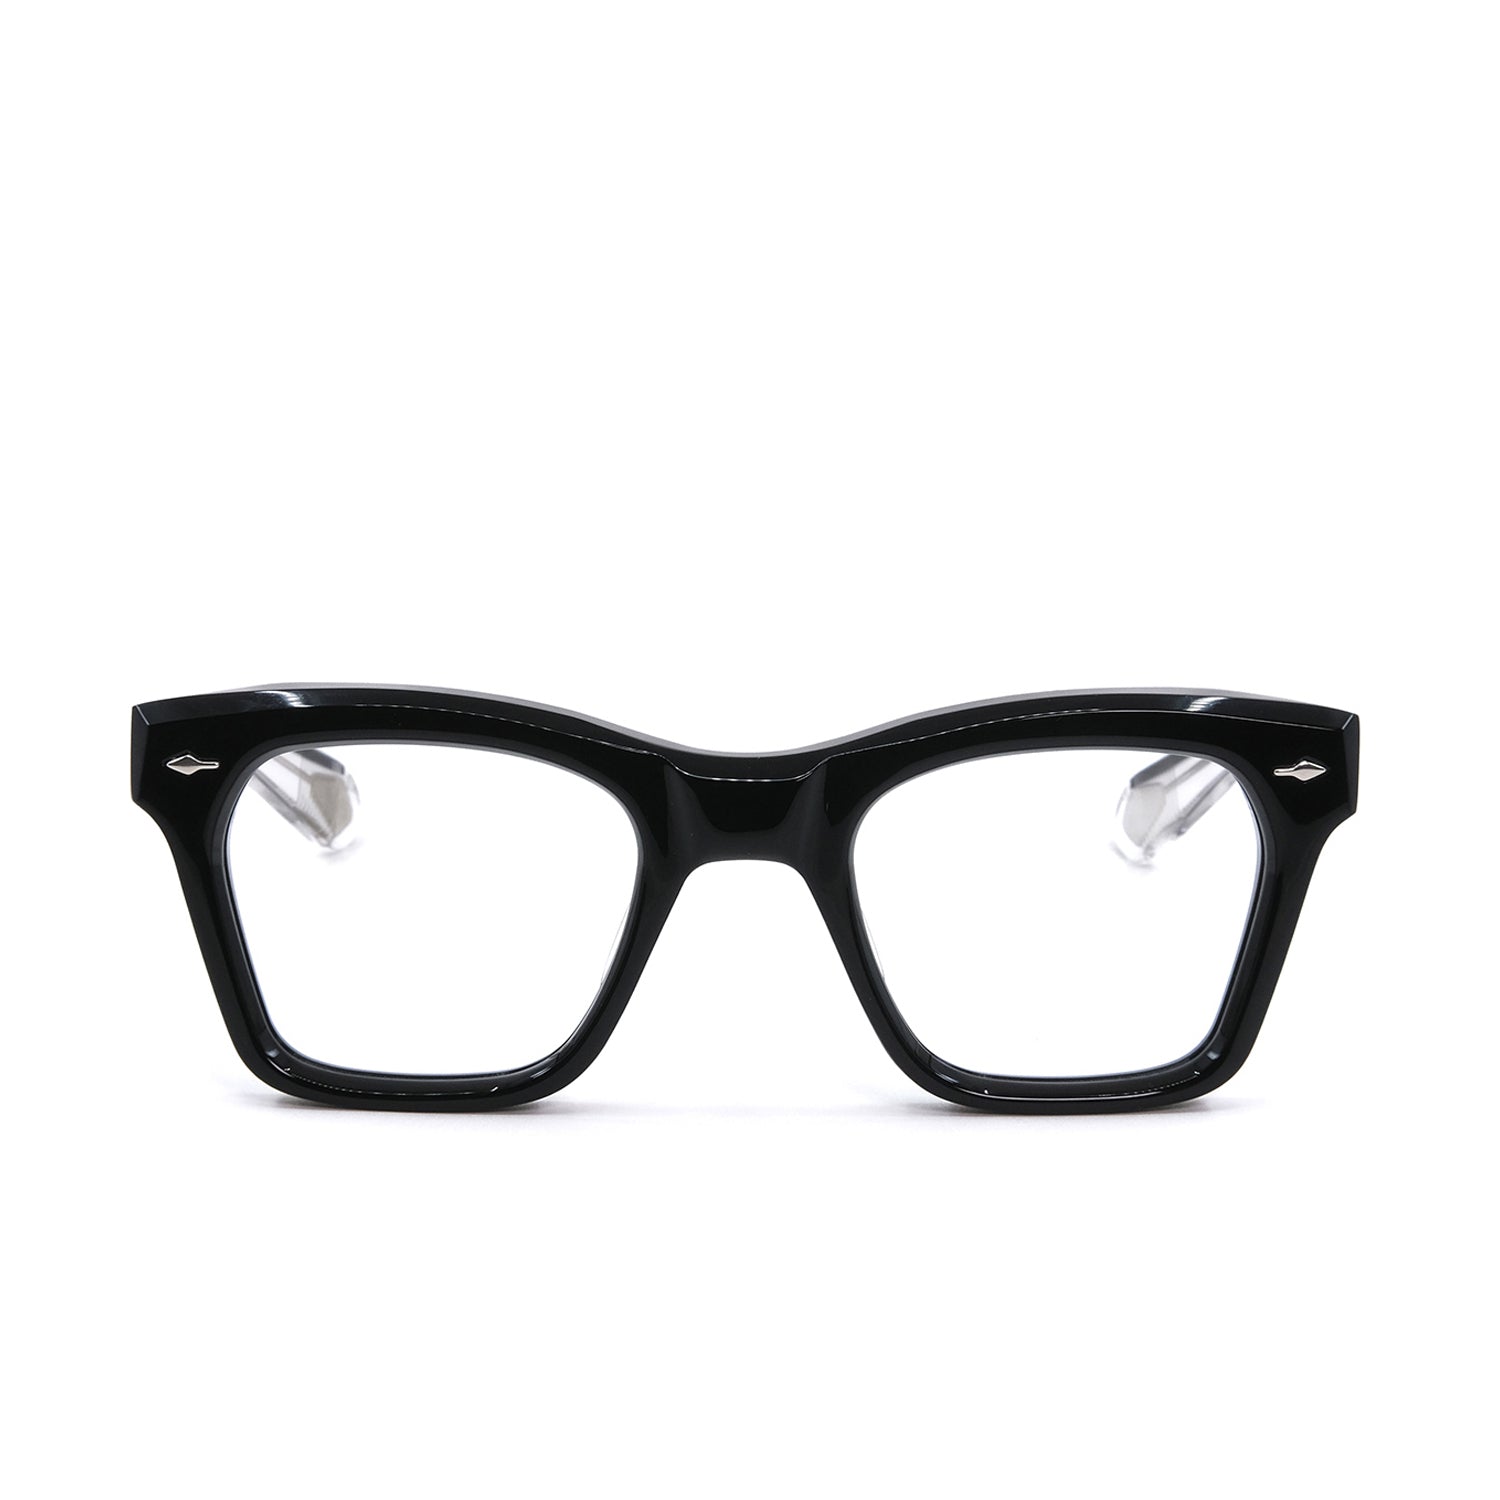 JACQUES MARIE MAGE PICABIA DESIGNER FRAME